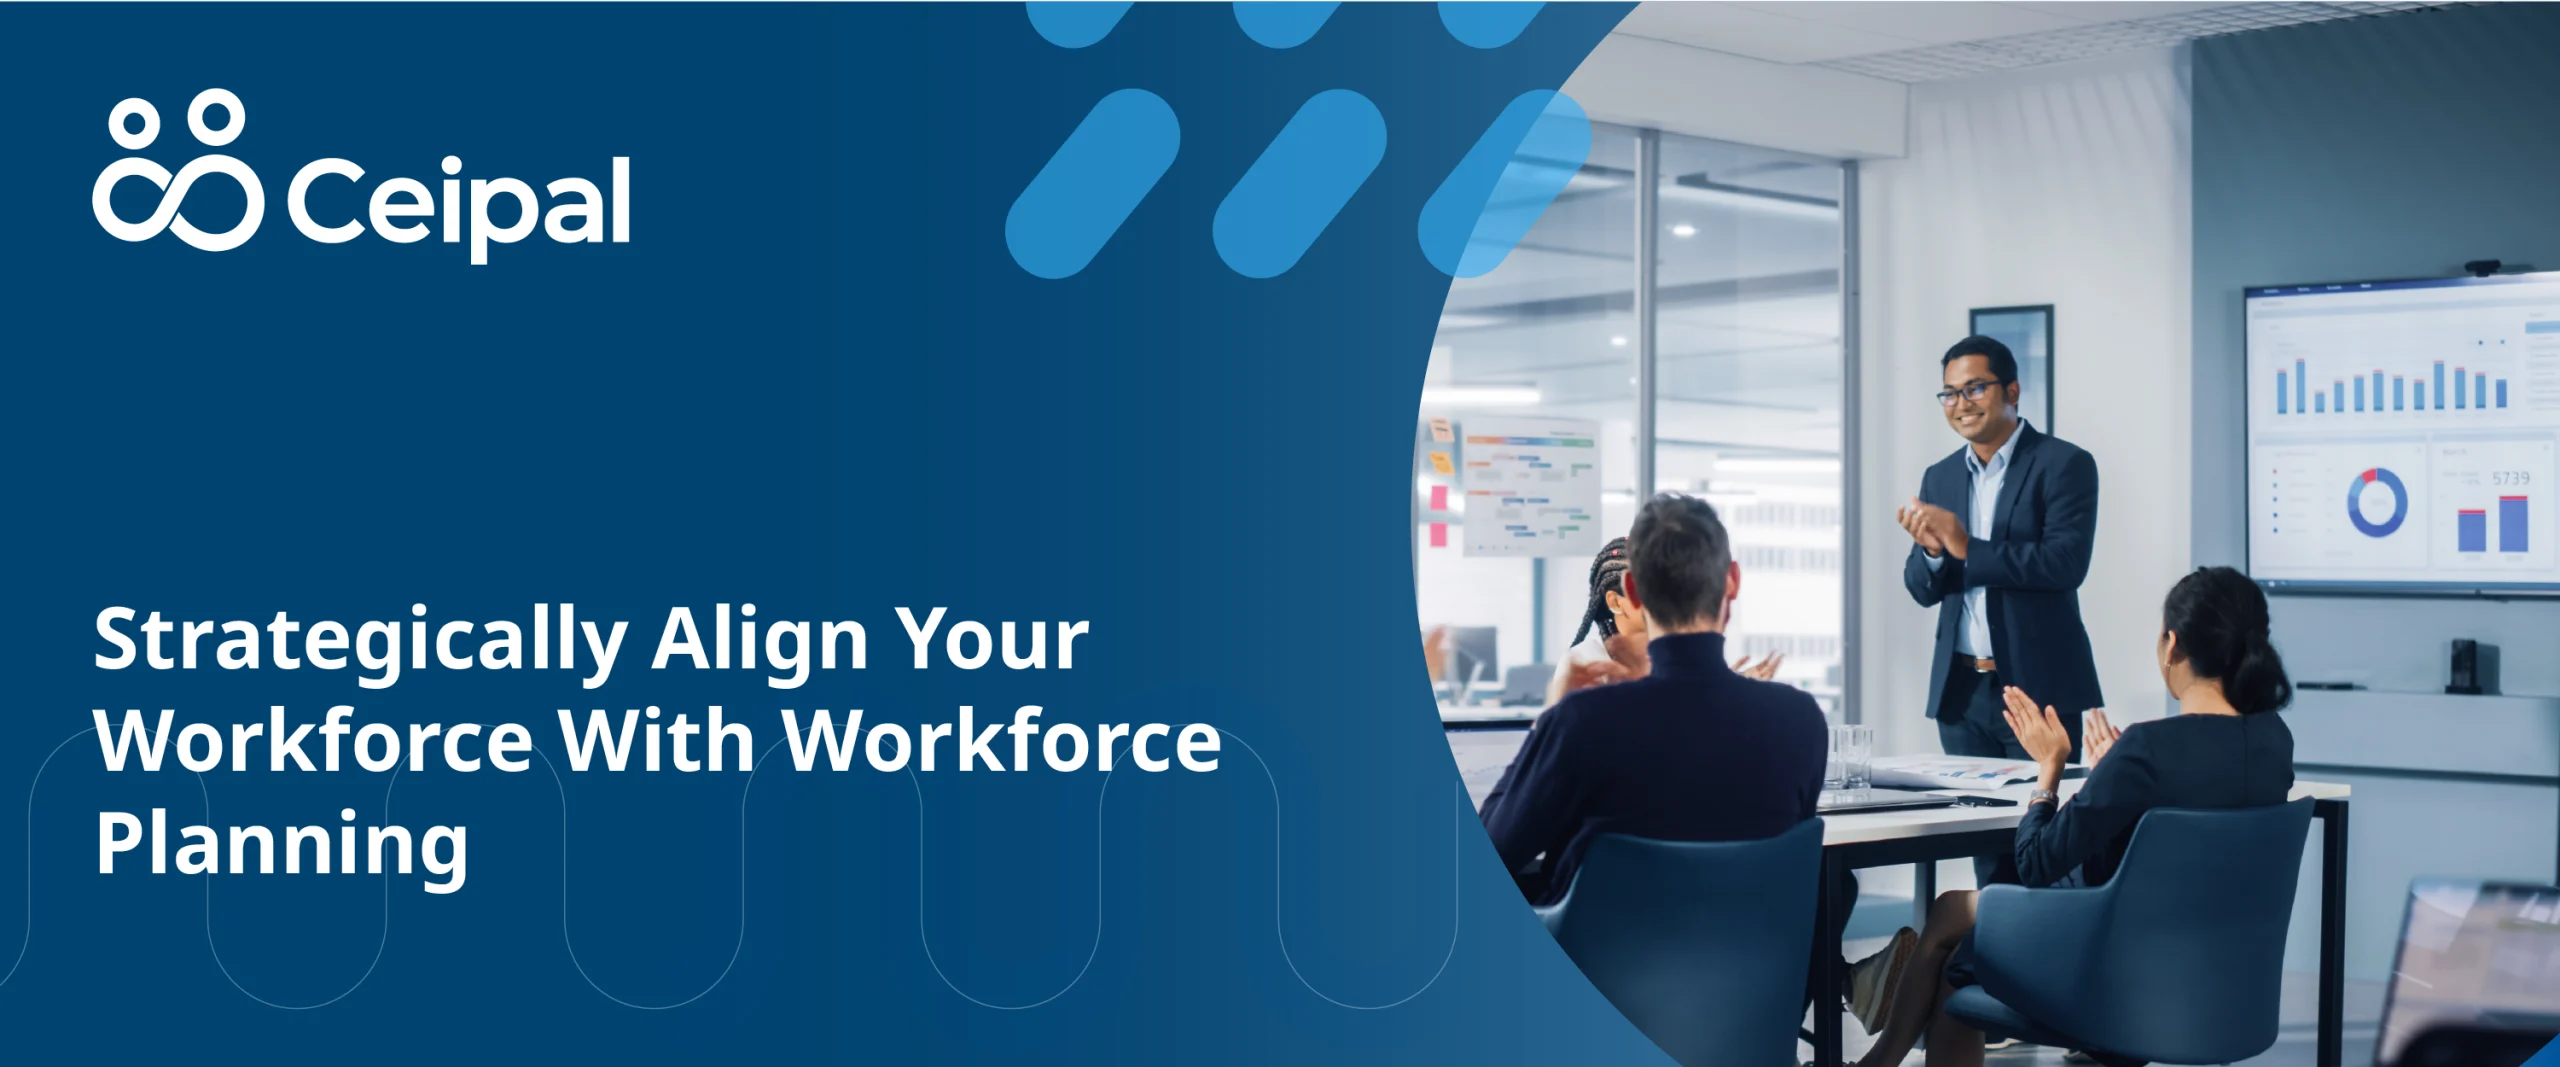 Strategically Align Your Workforce With Workforce Planning